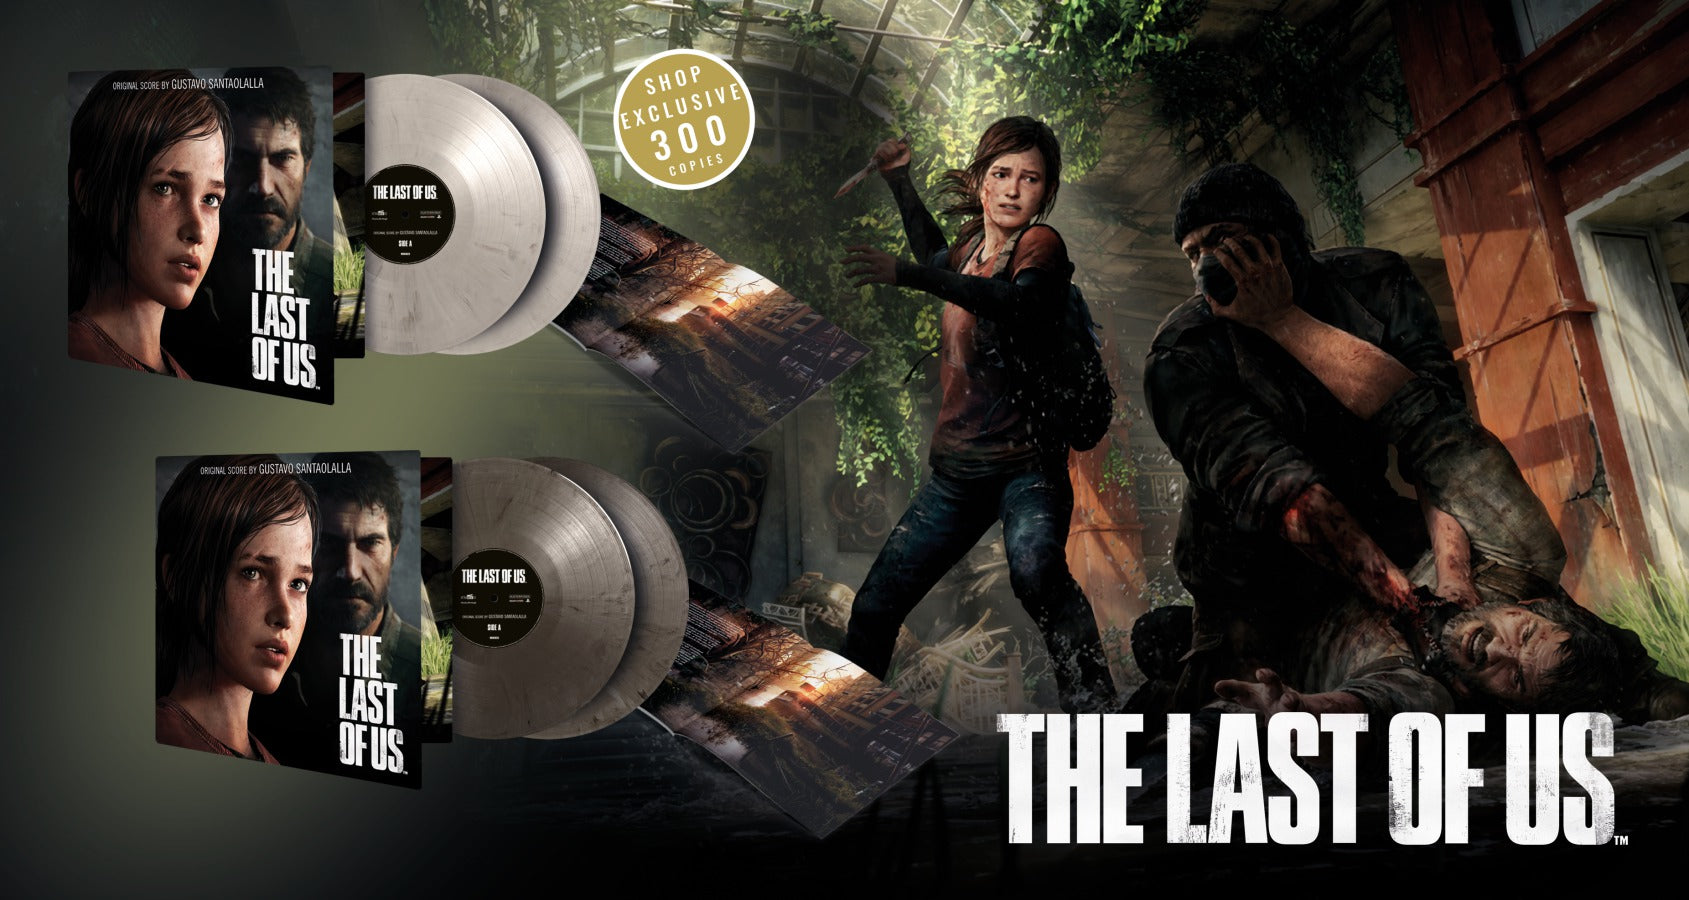 The Last Of Us (ATM Shop Exclusive)